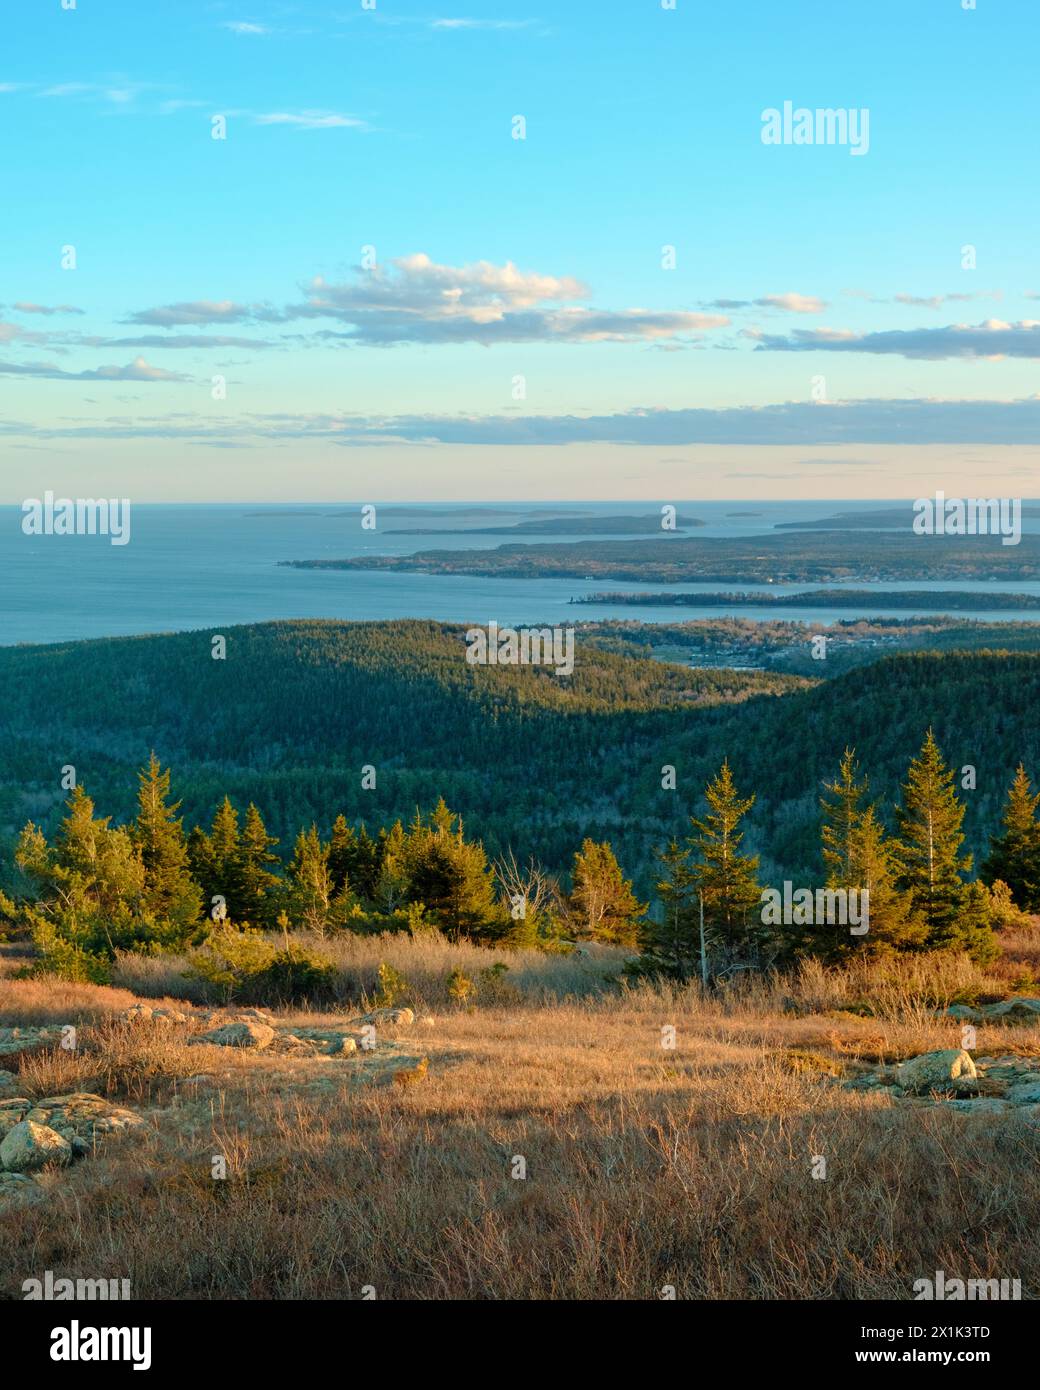 Sunset view from Penobscot Mountain in Acadia National Park on Mount Desert Island, Maine Stock Photo